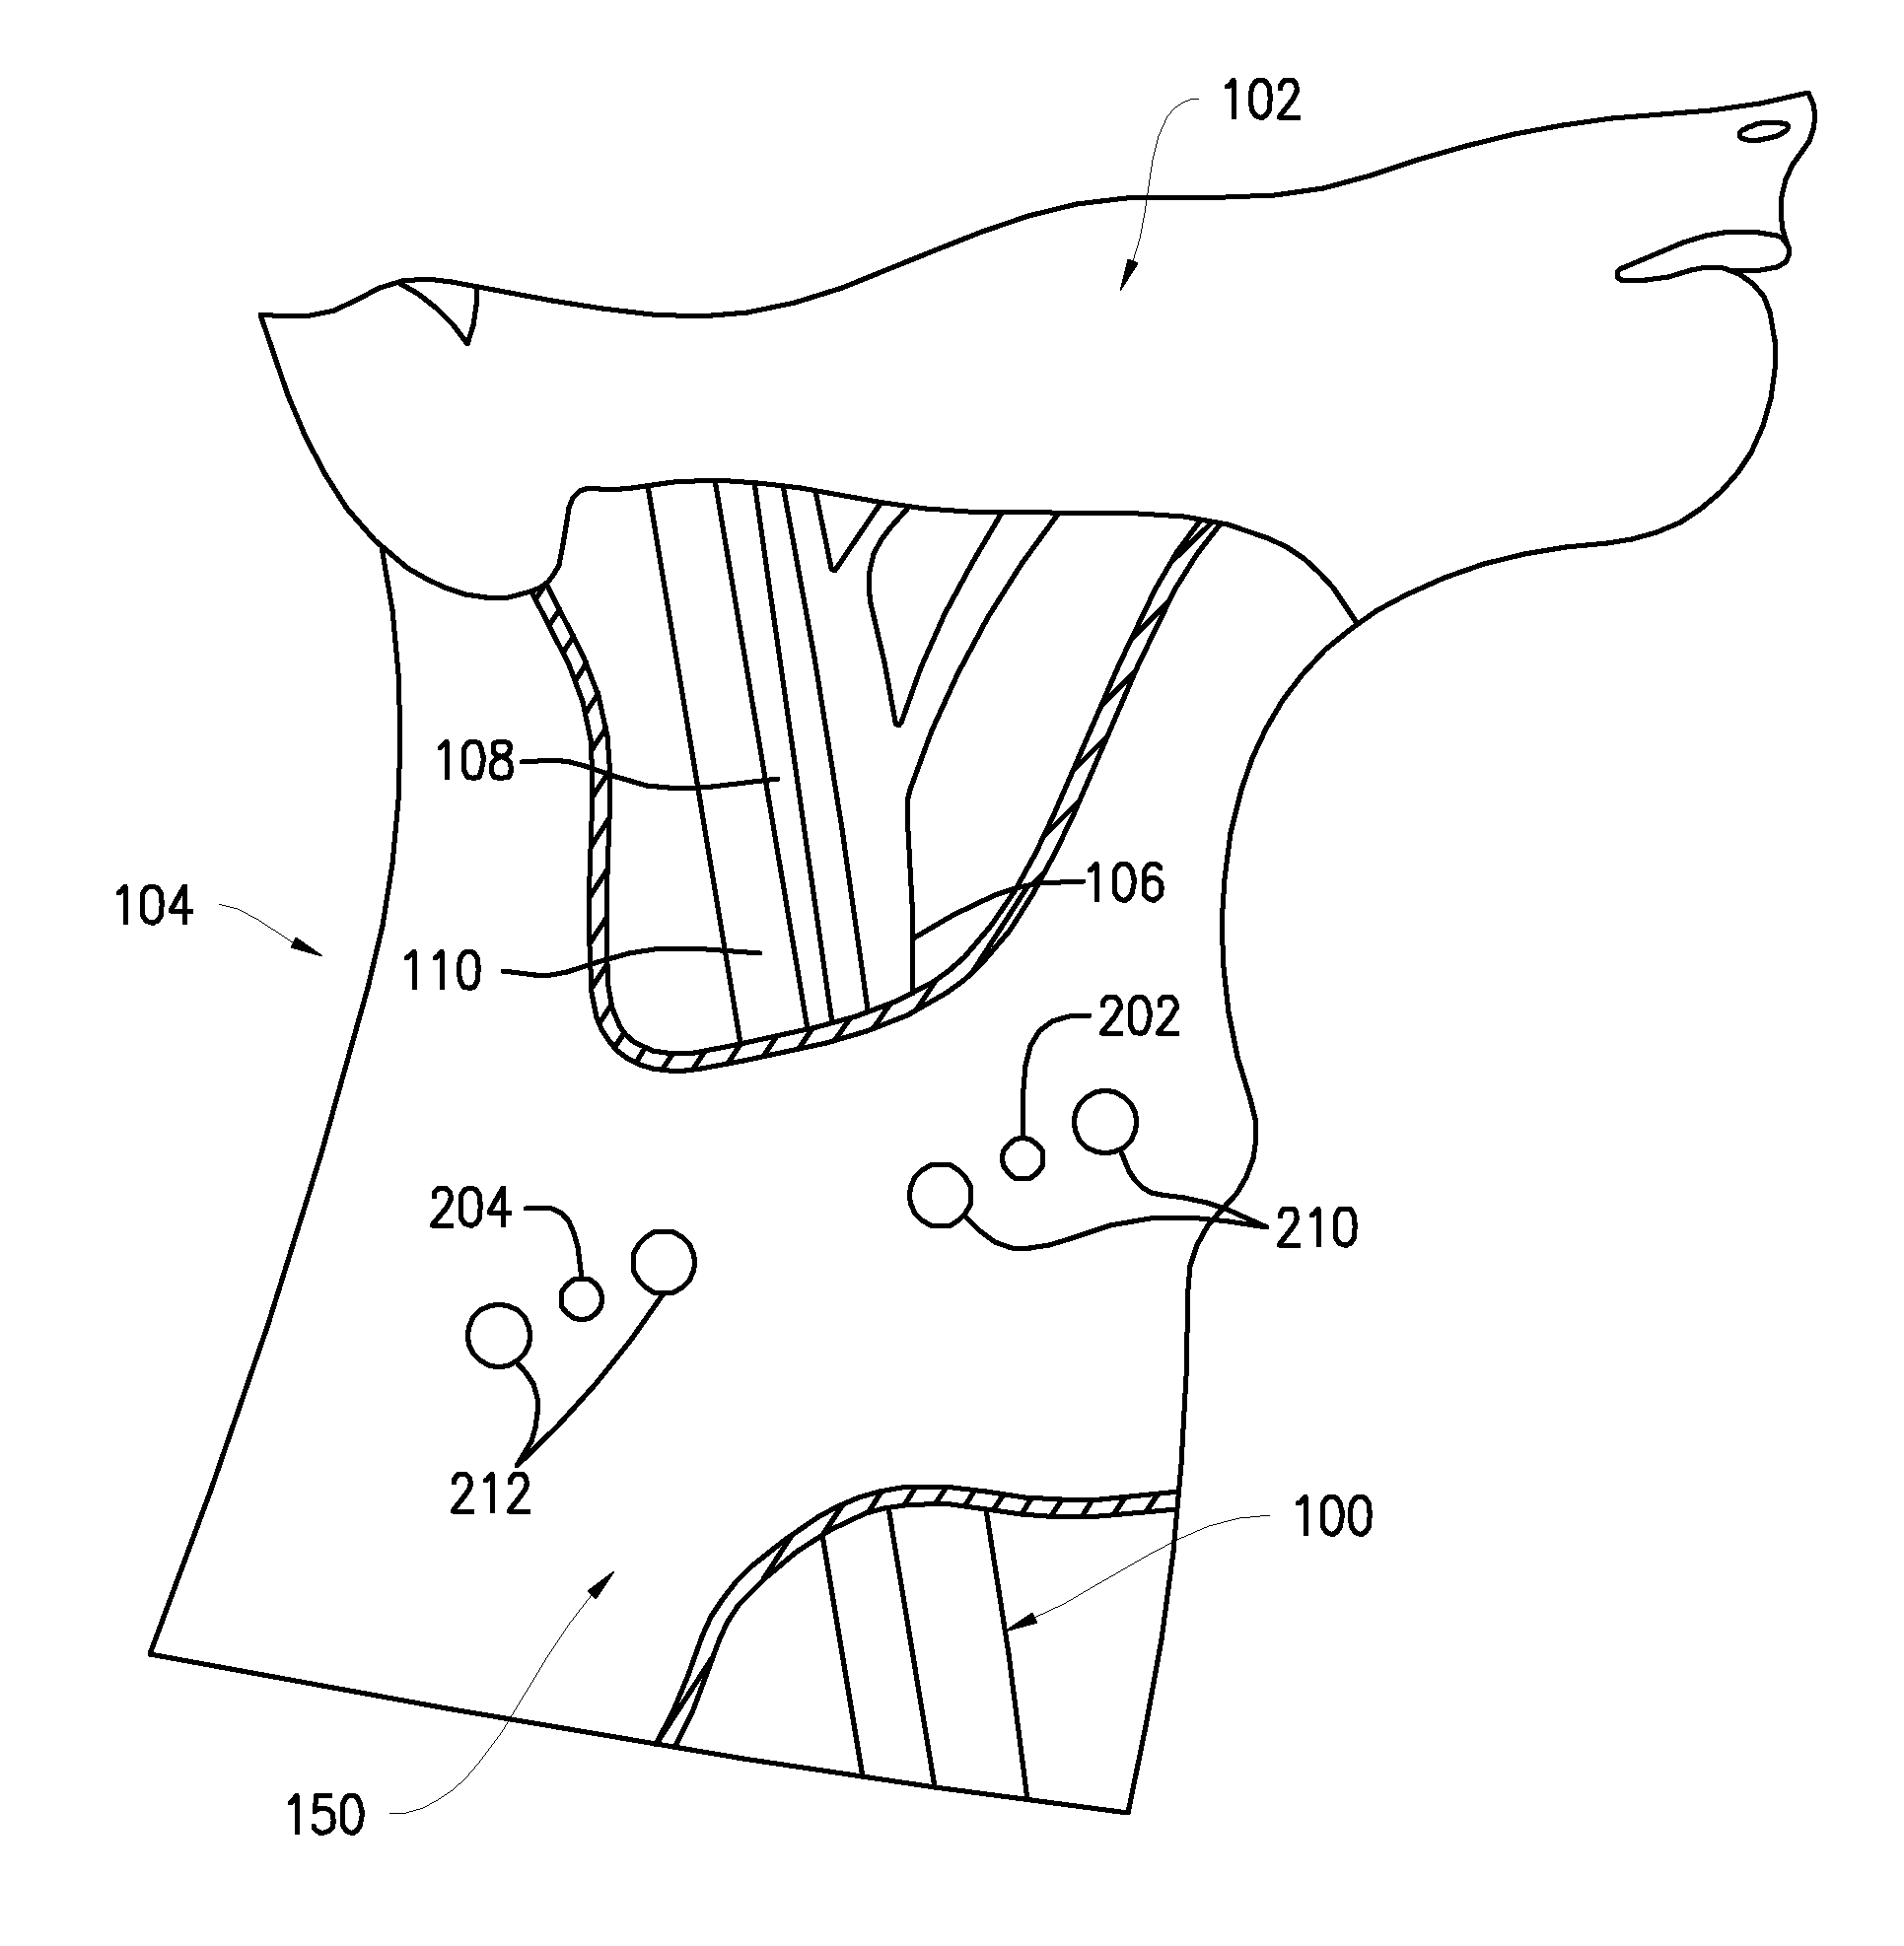 Systems and methods for selectively applying electrical energy to tissue